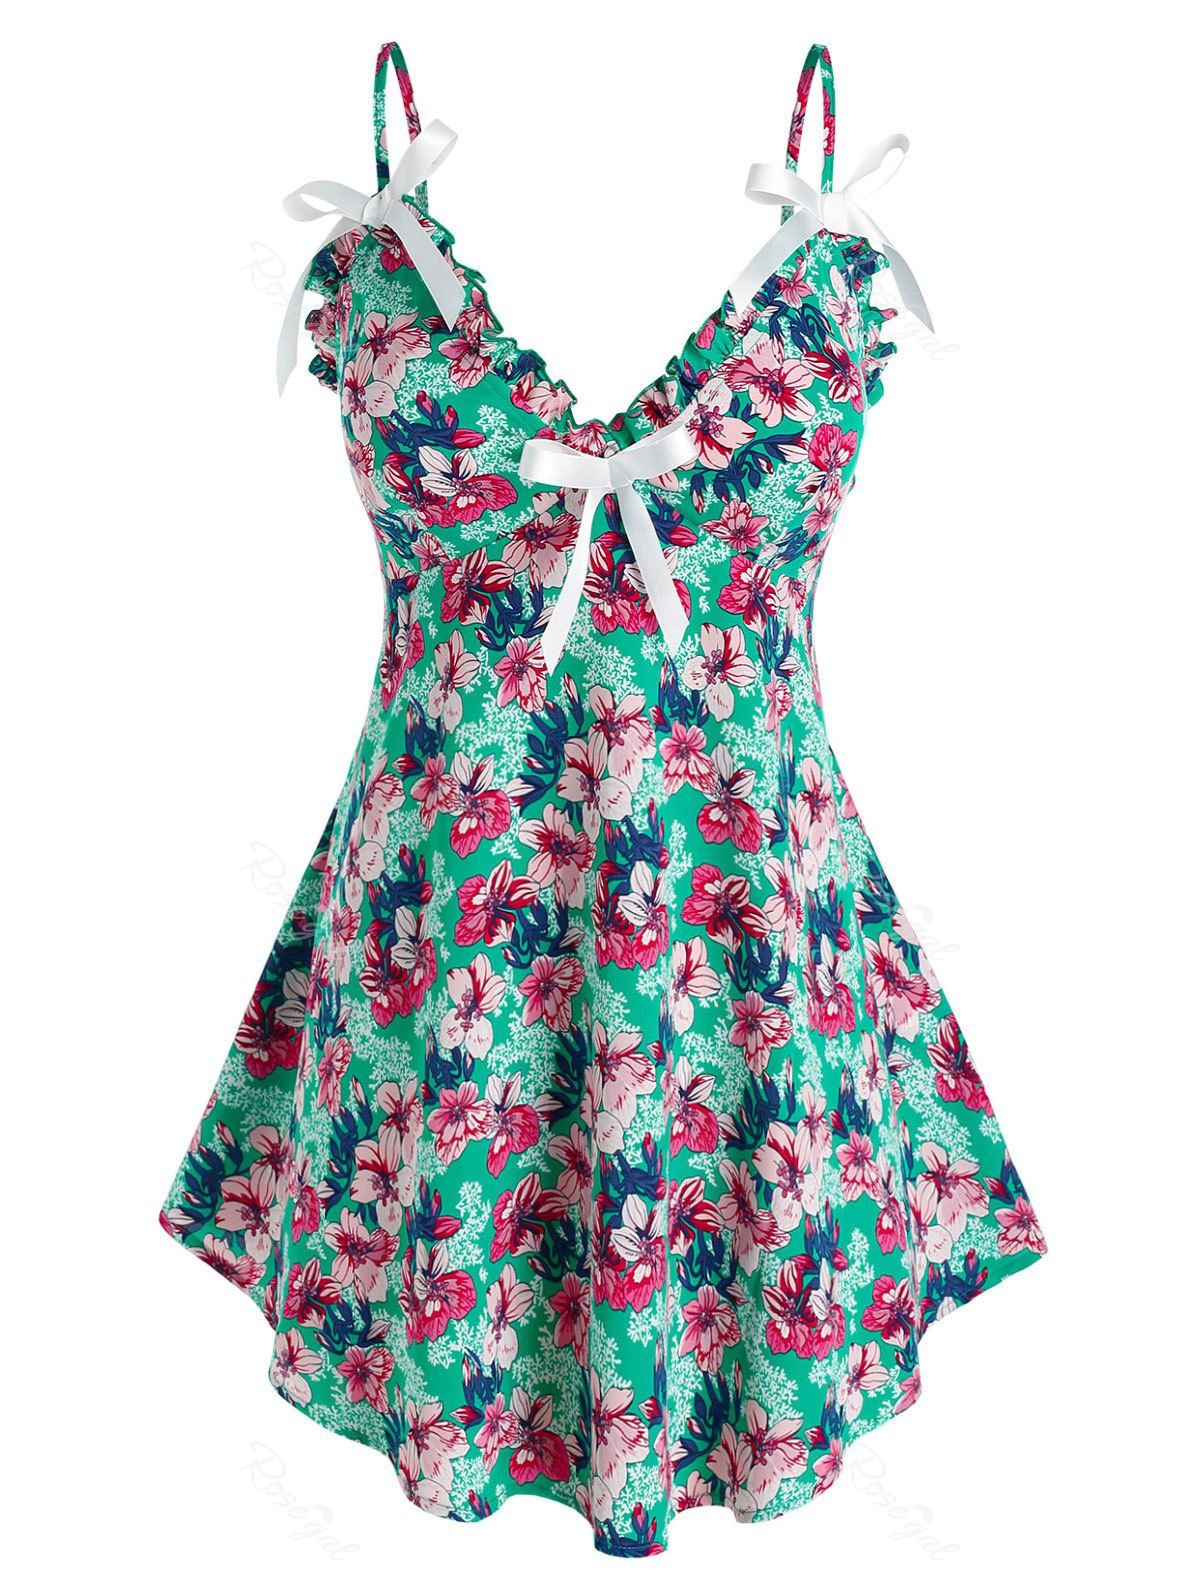 New Plus Size Floral Frill Bowknot Cami Tank Top  